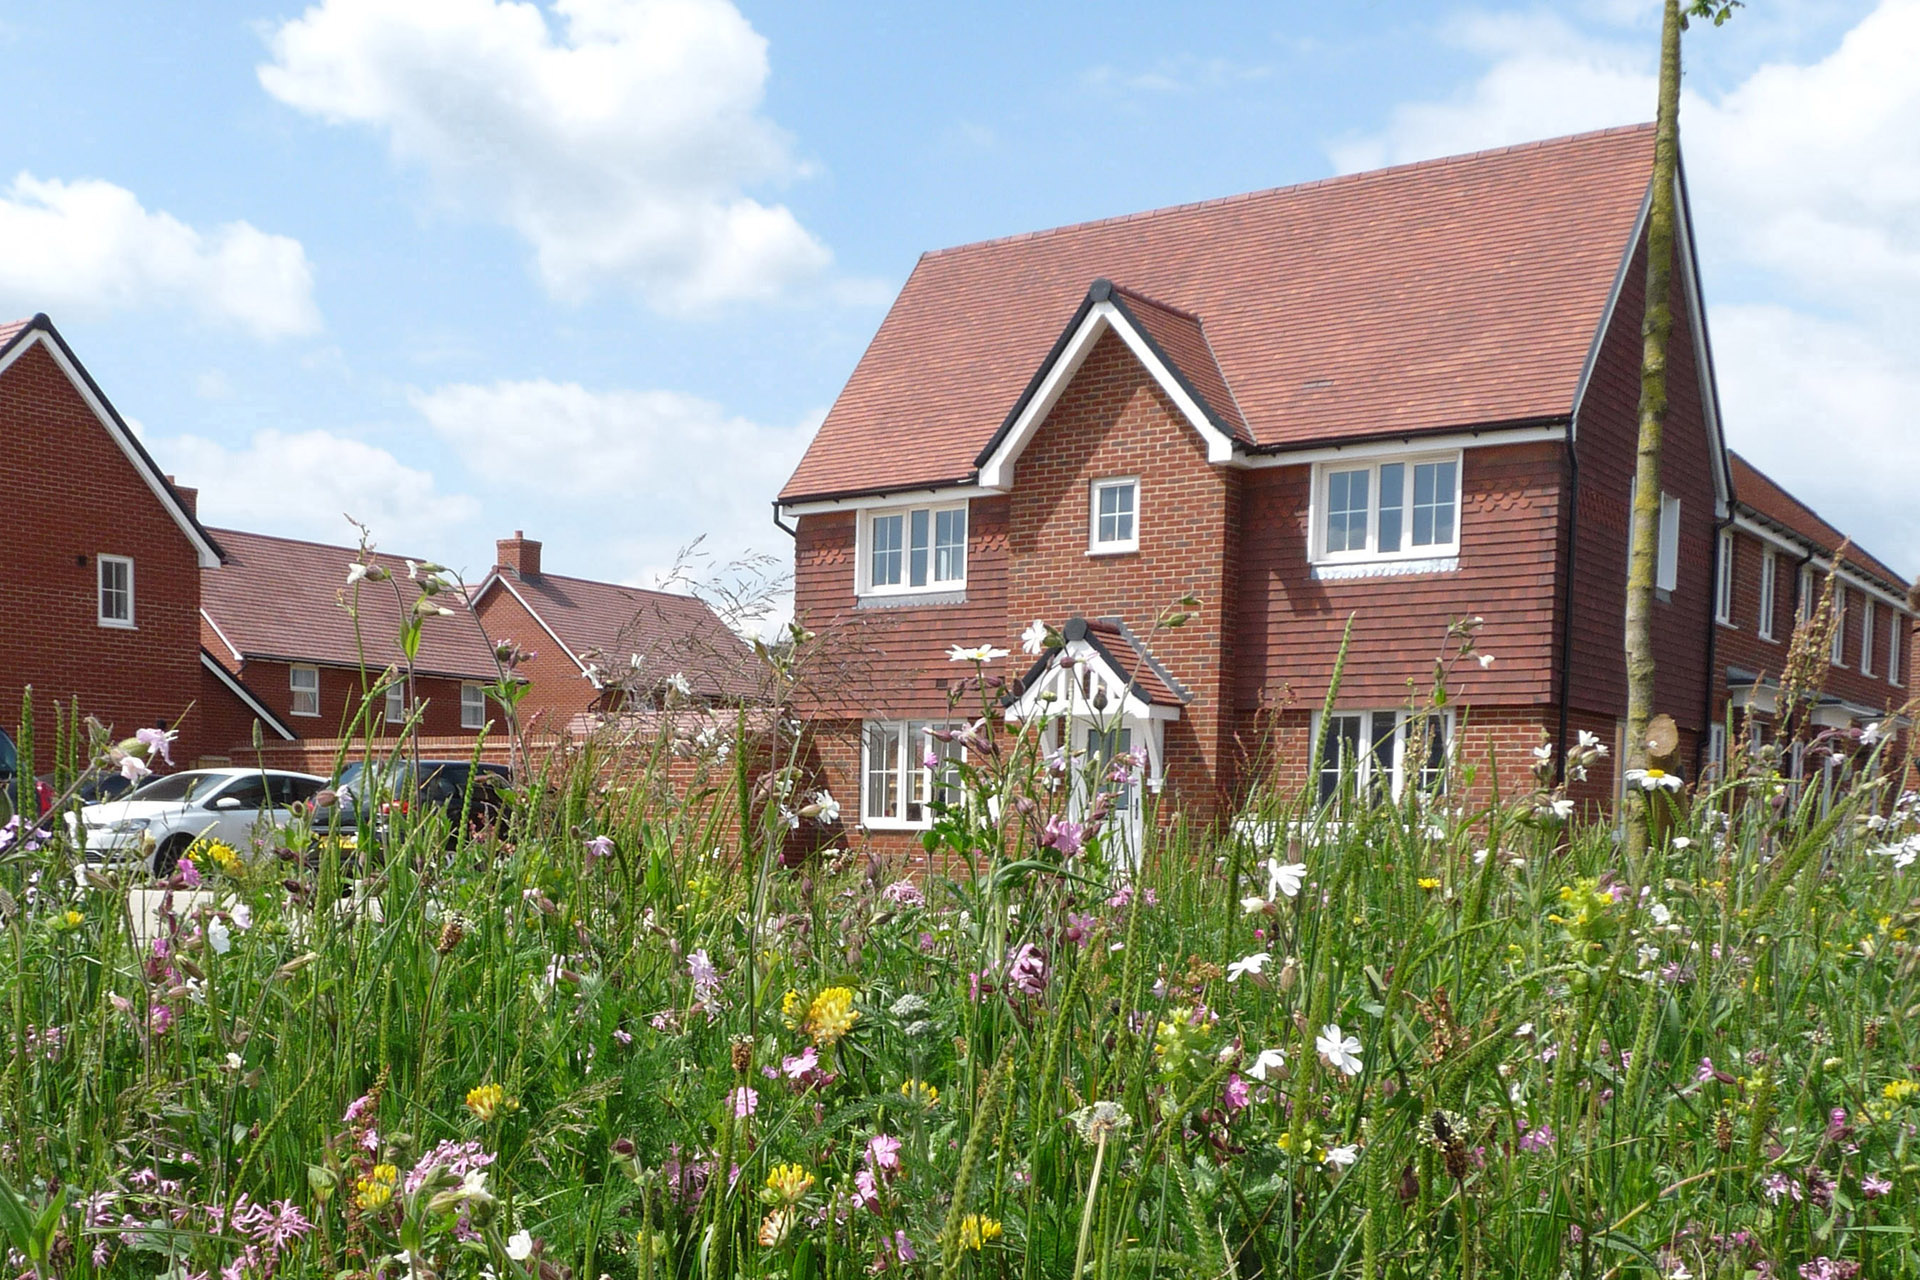 a photo of a red brick house with some wildflowers in the foreground